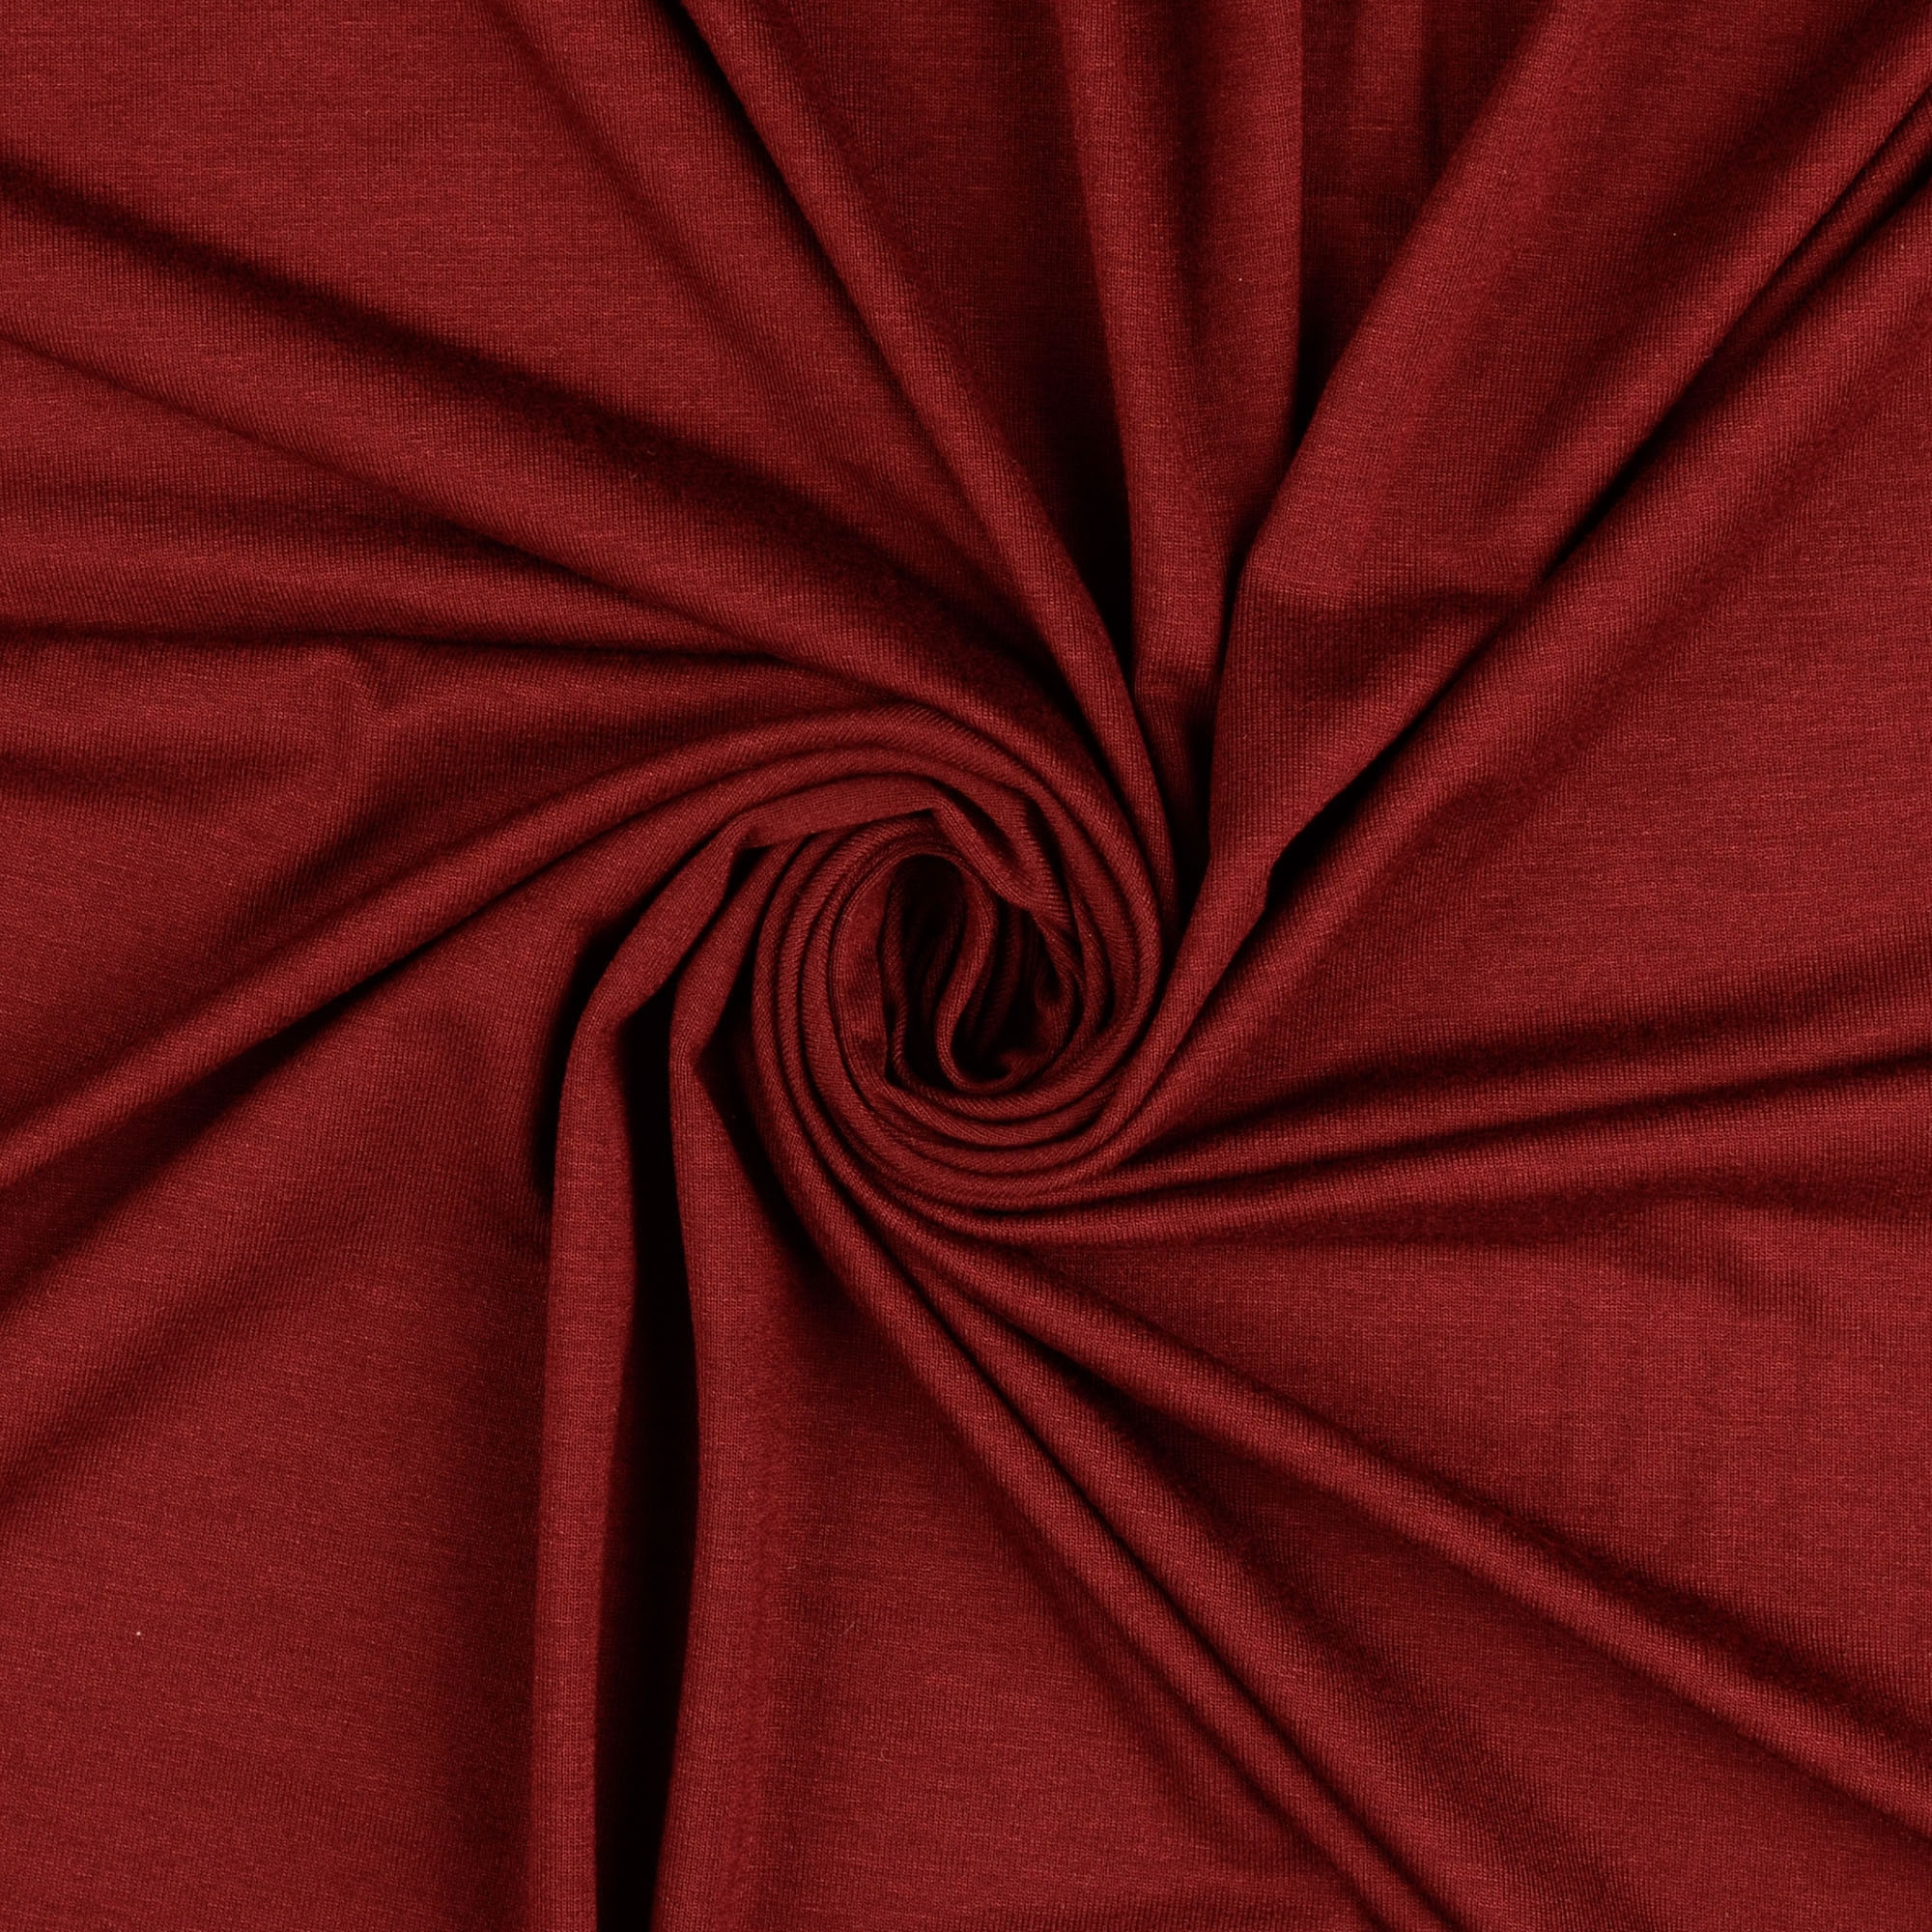 red jersey fabric